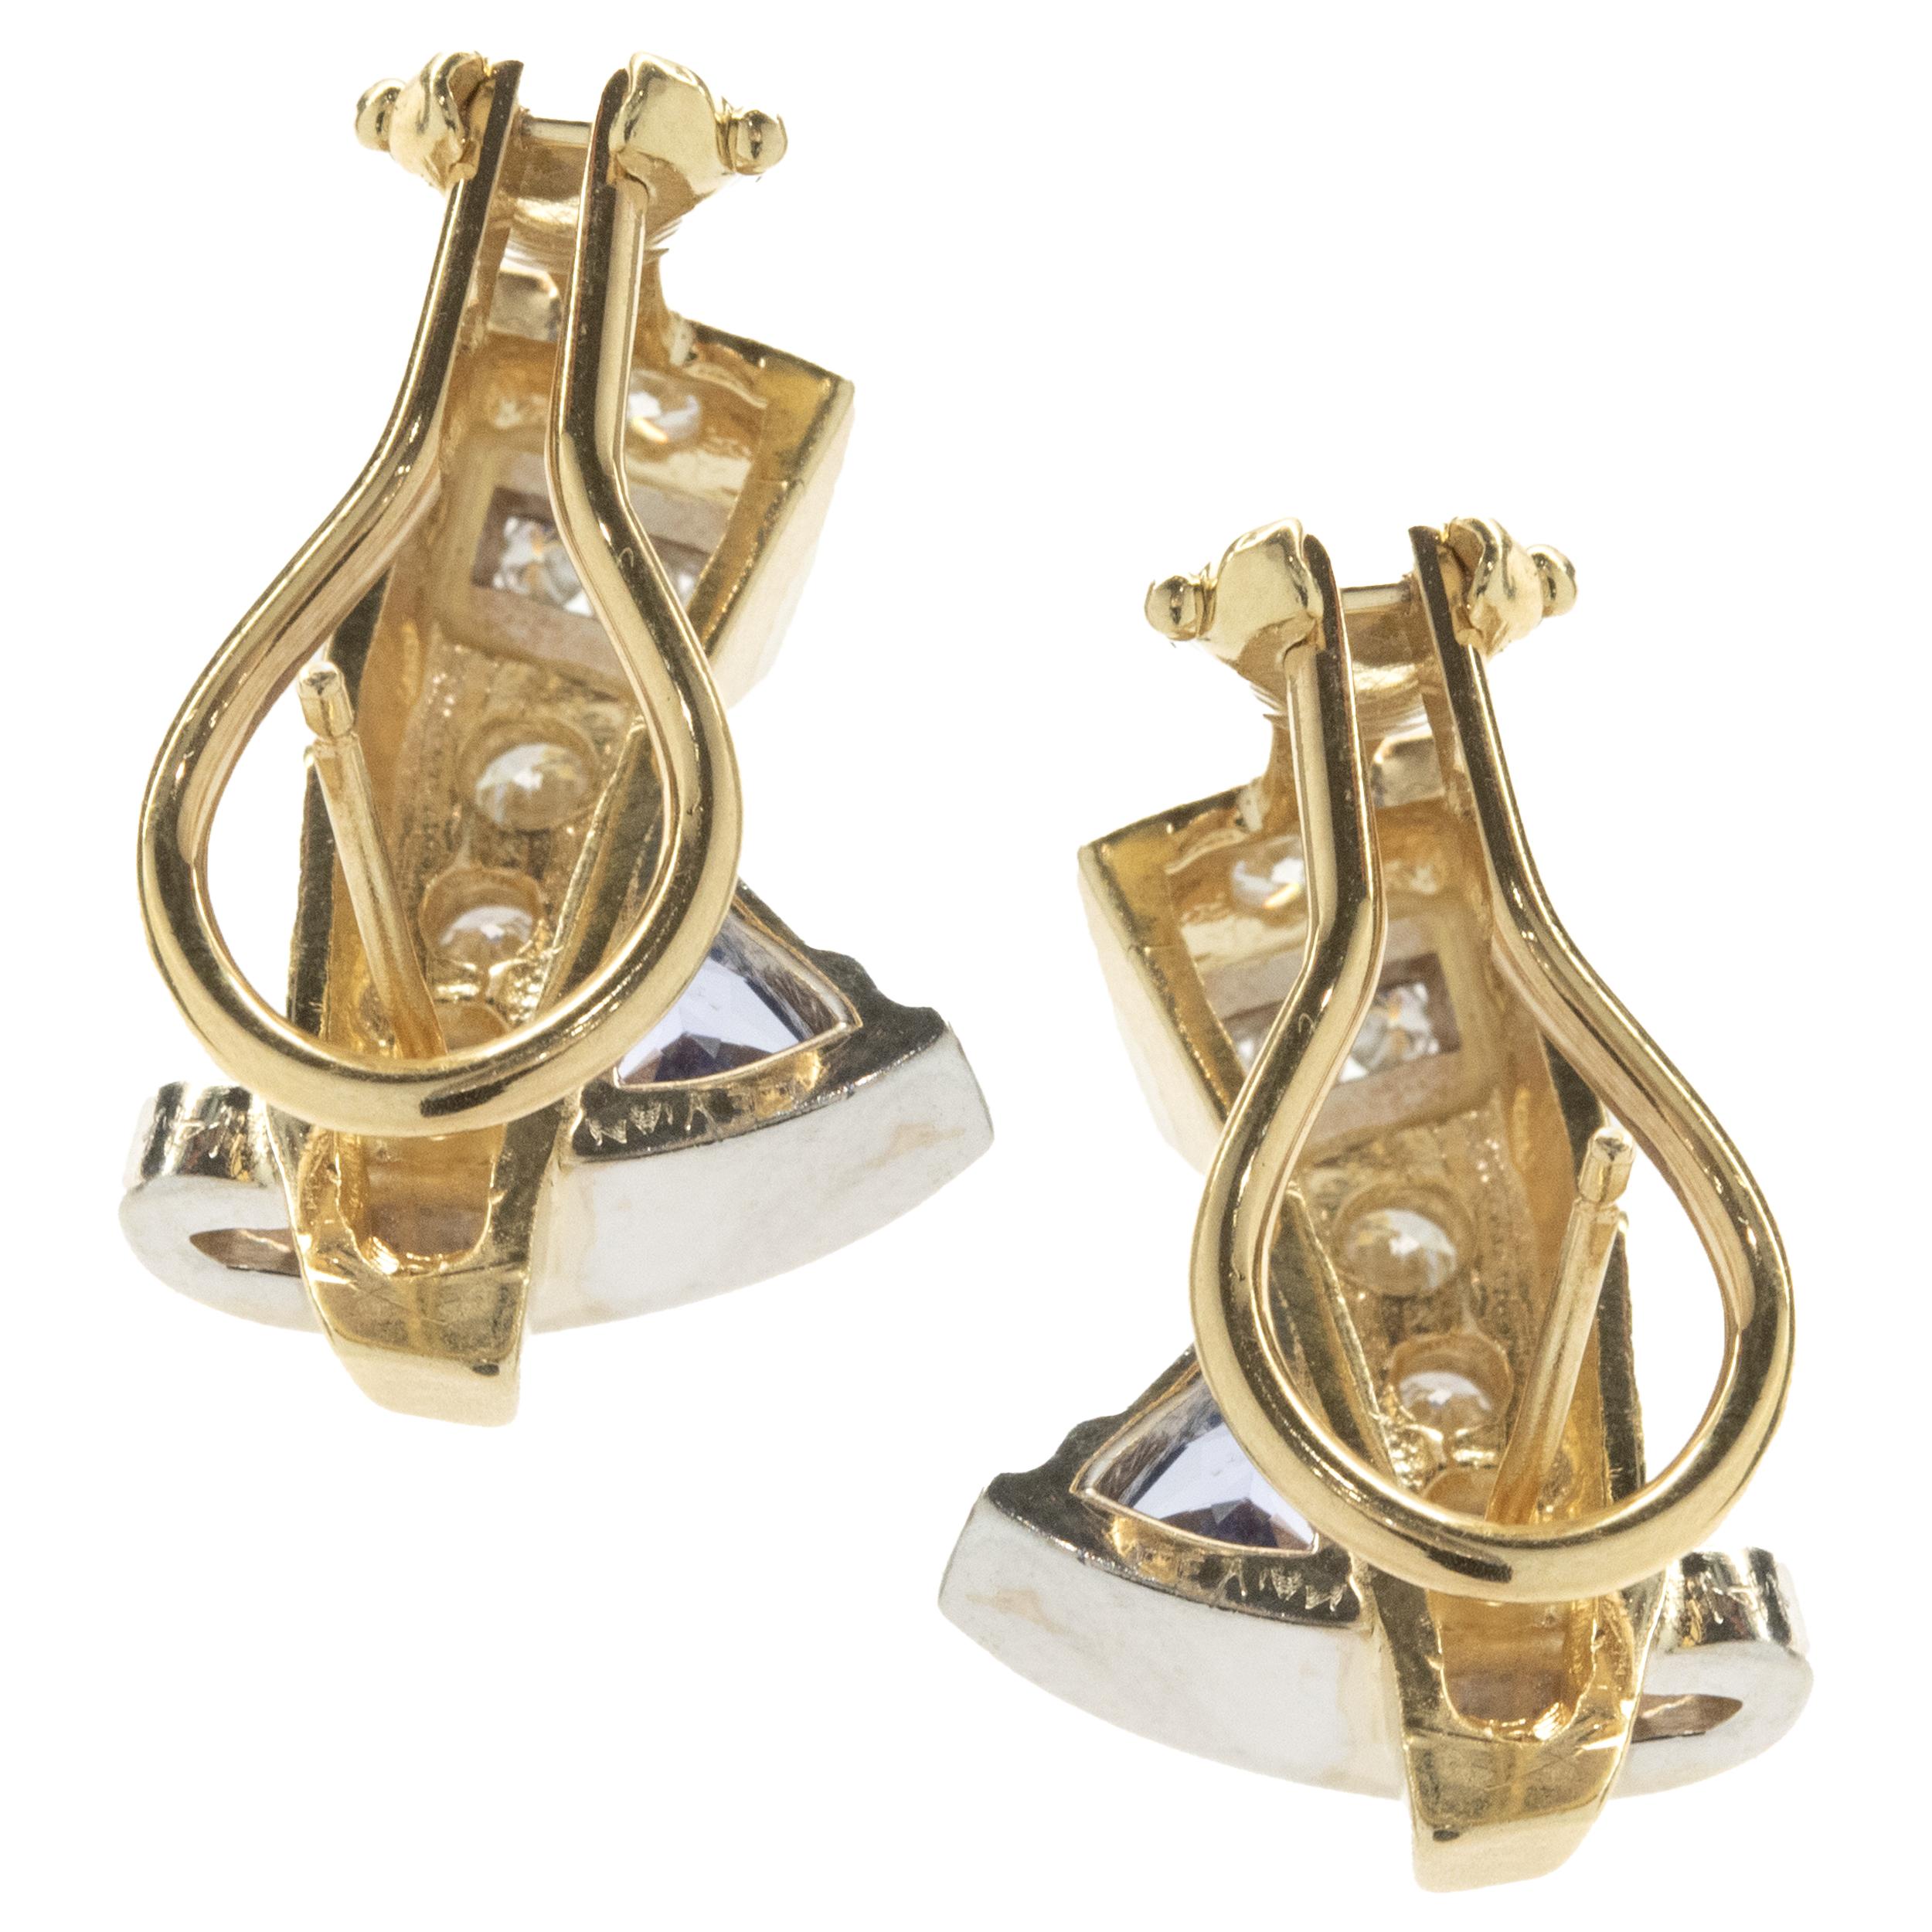 Designer: LeVian
Material: 14K yellow & white gold
Diamond: 16 round brilliant cut = .39cttw
Color: G
Clarity: SI1
Weight:  9.02 grams
Dimensions: earrings measure 20.3 X 13.5mm